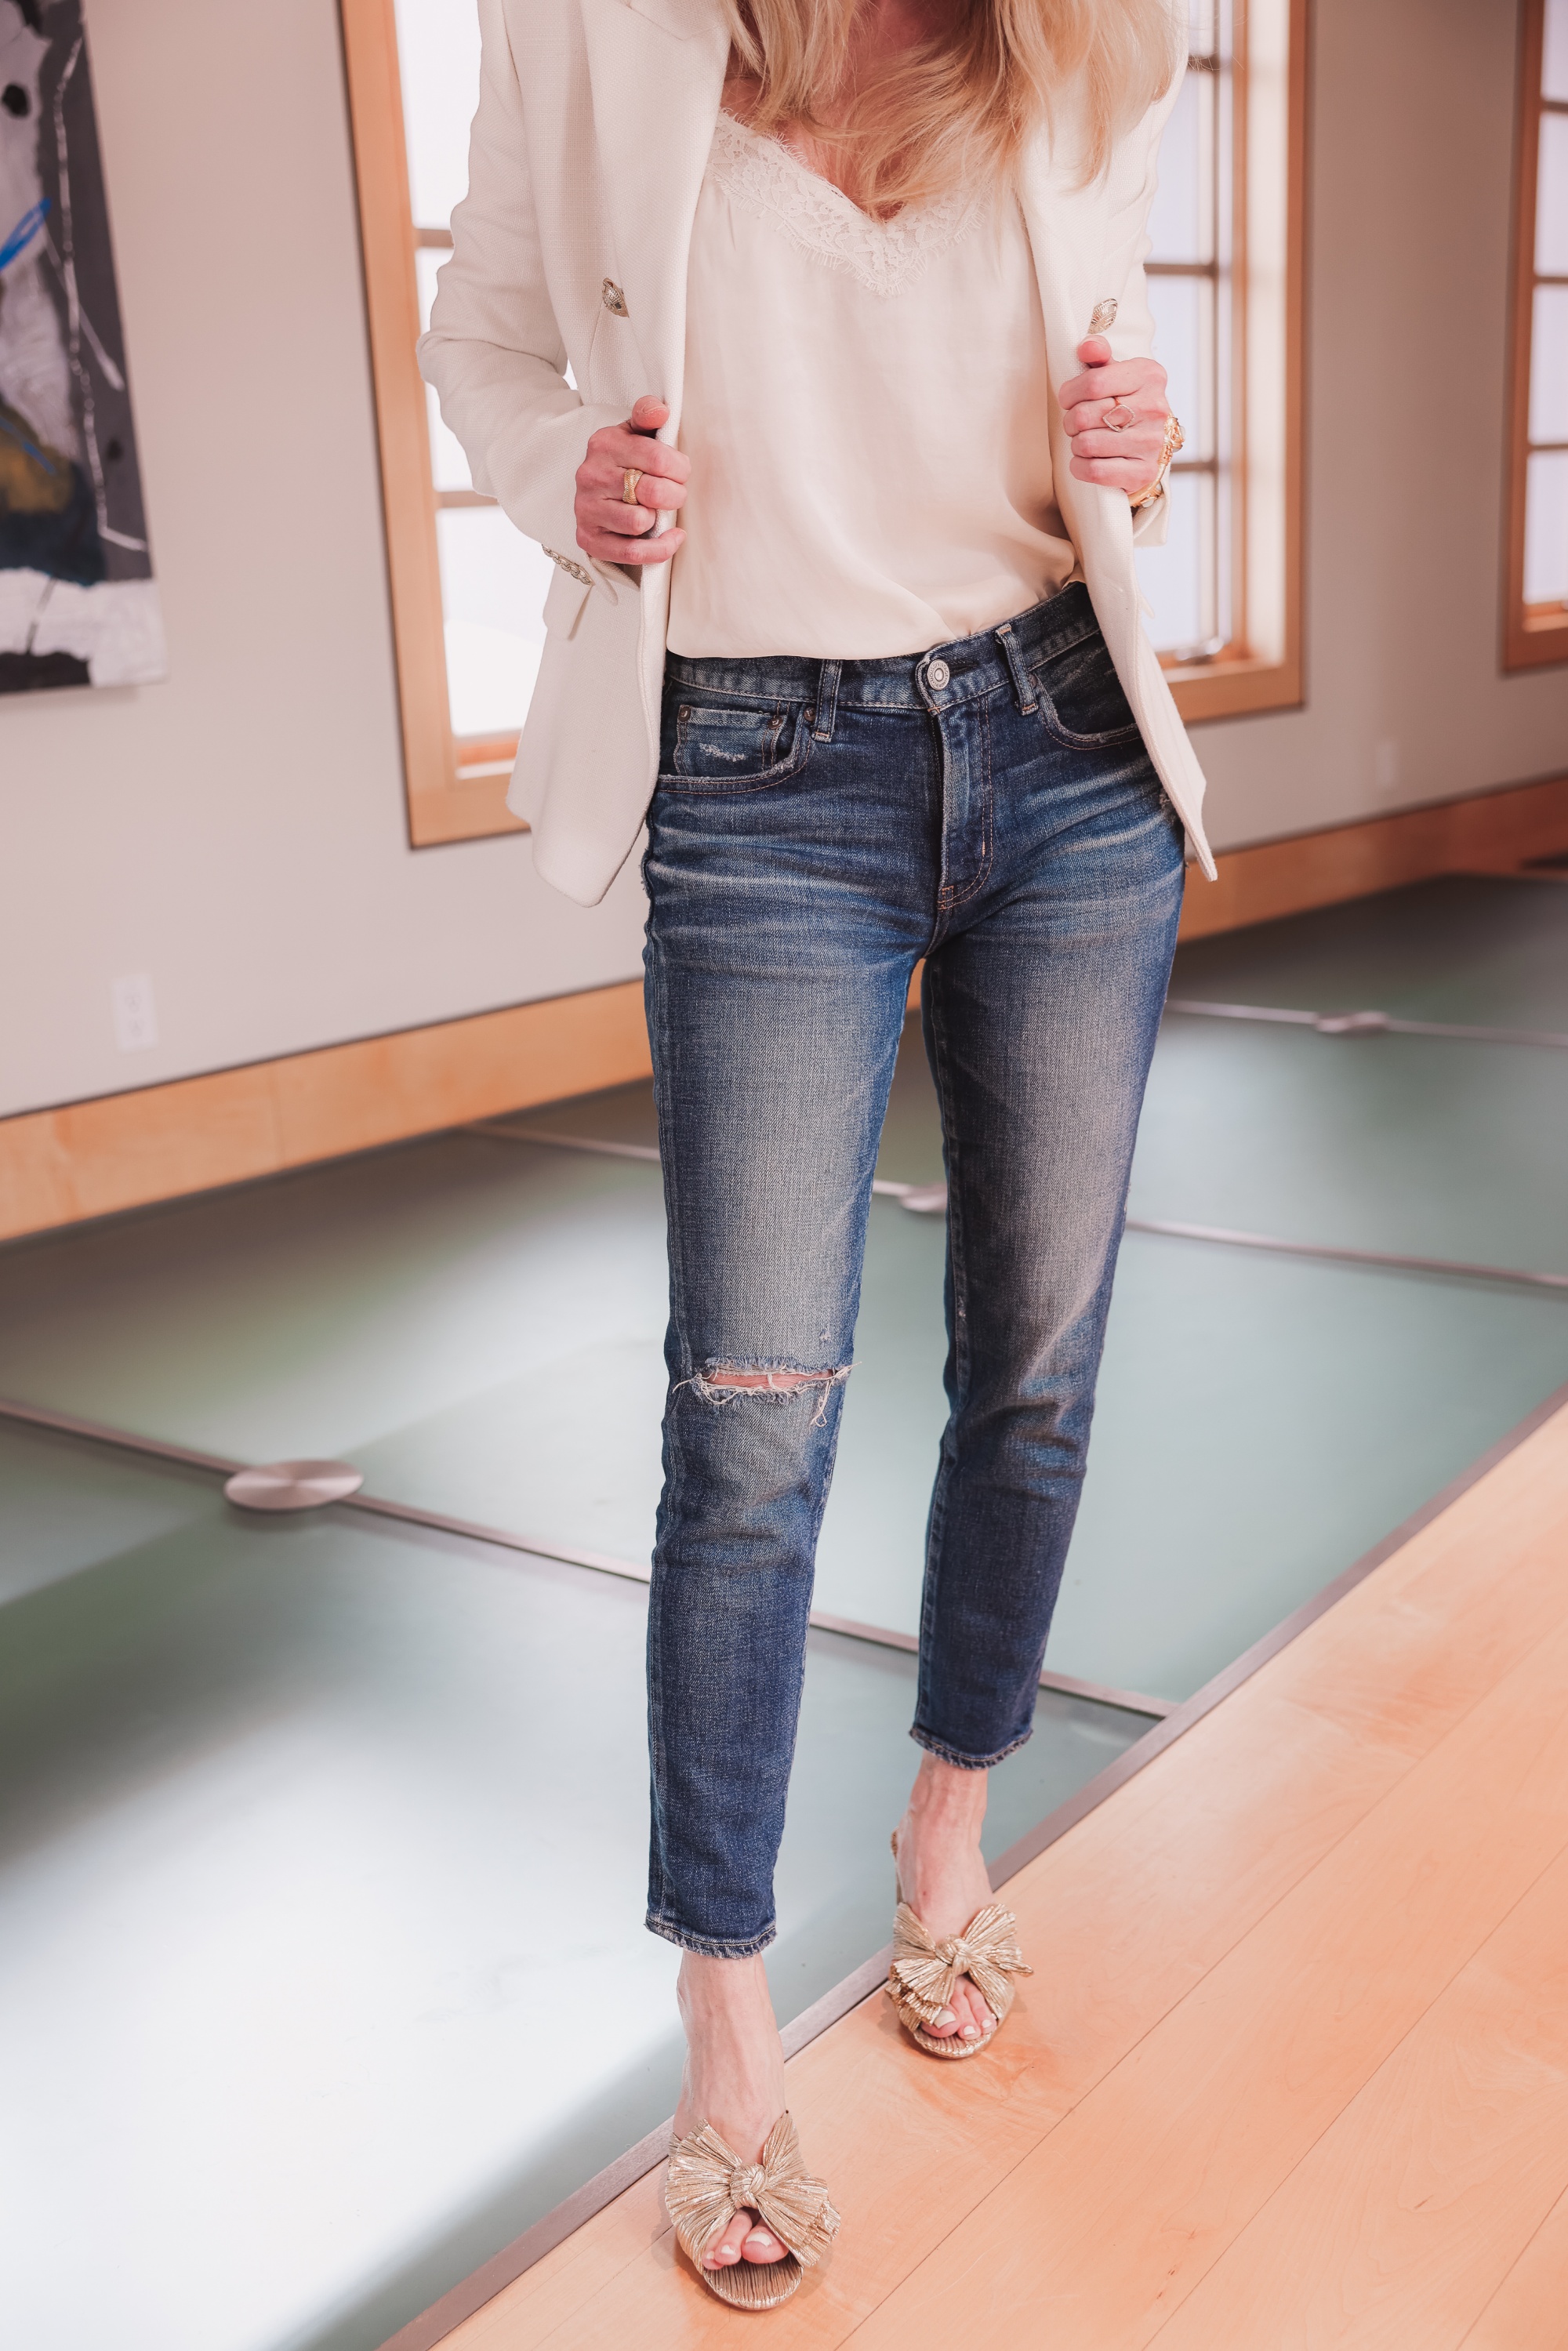 How To Look Slimmer in Jeans